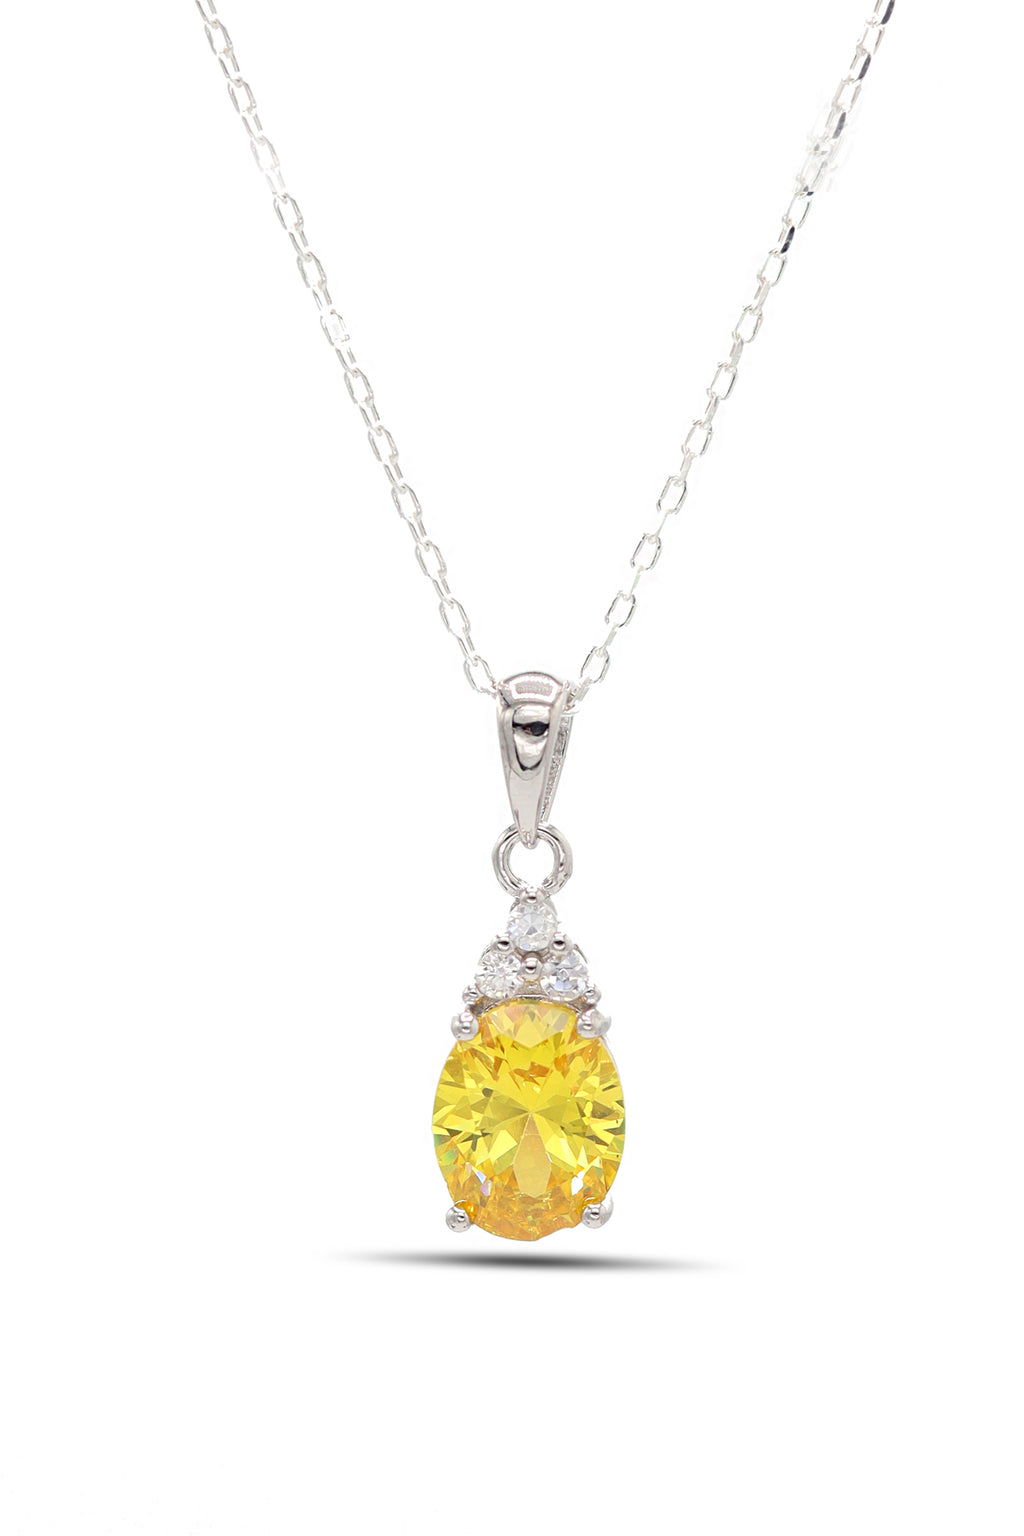 Oval Model Silver Necklace With Citrine and Zircon (NG201021897)